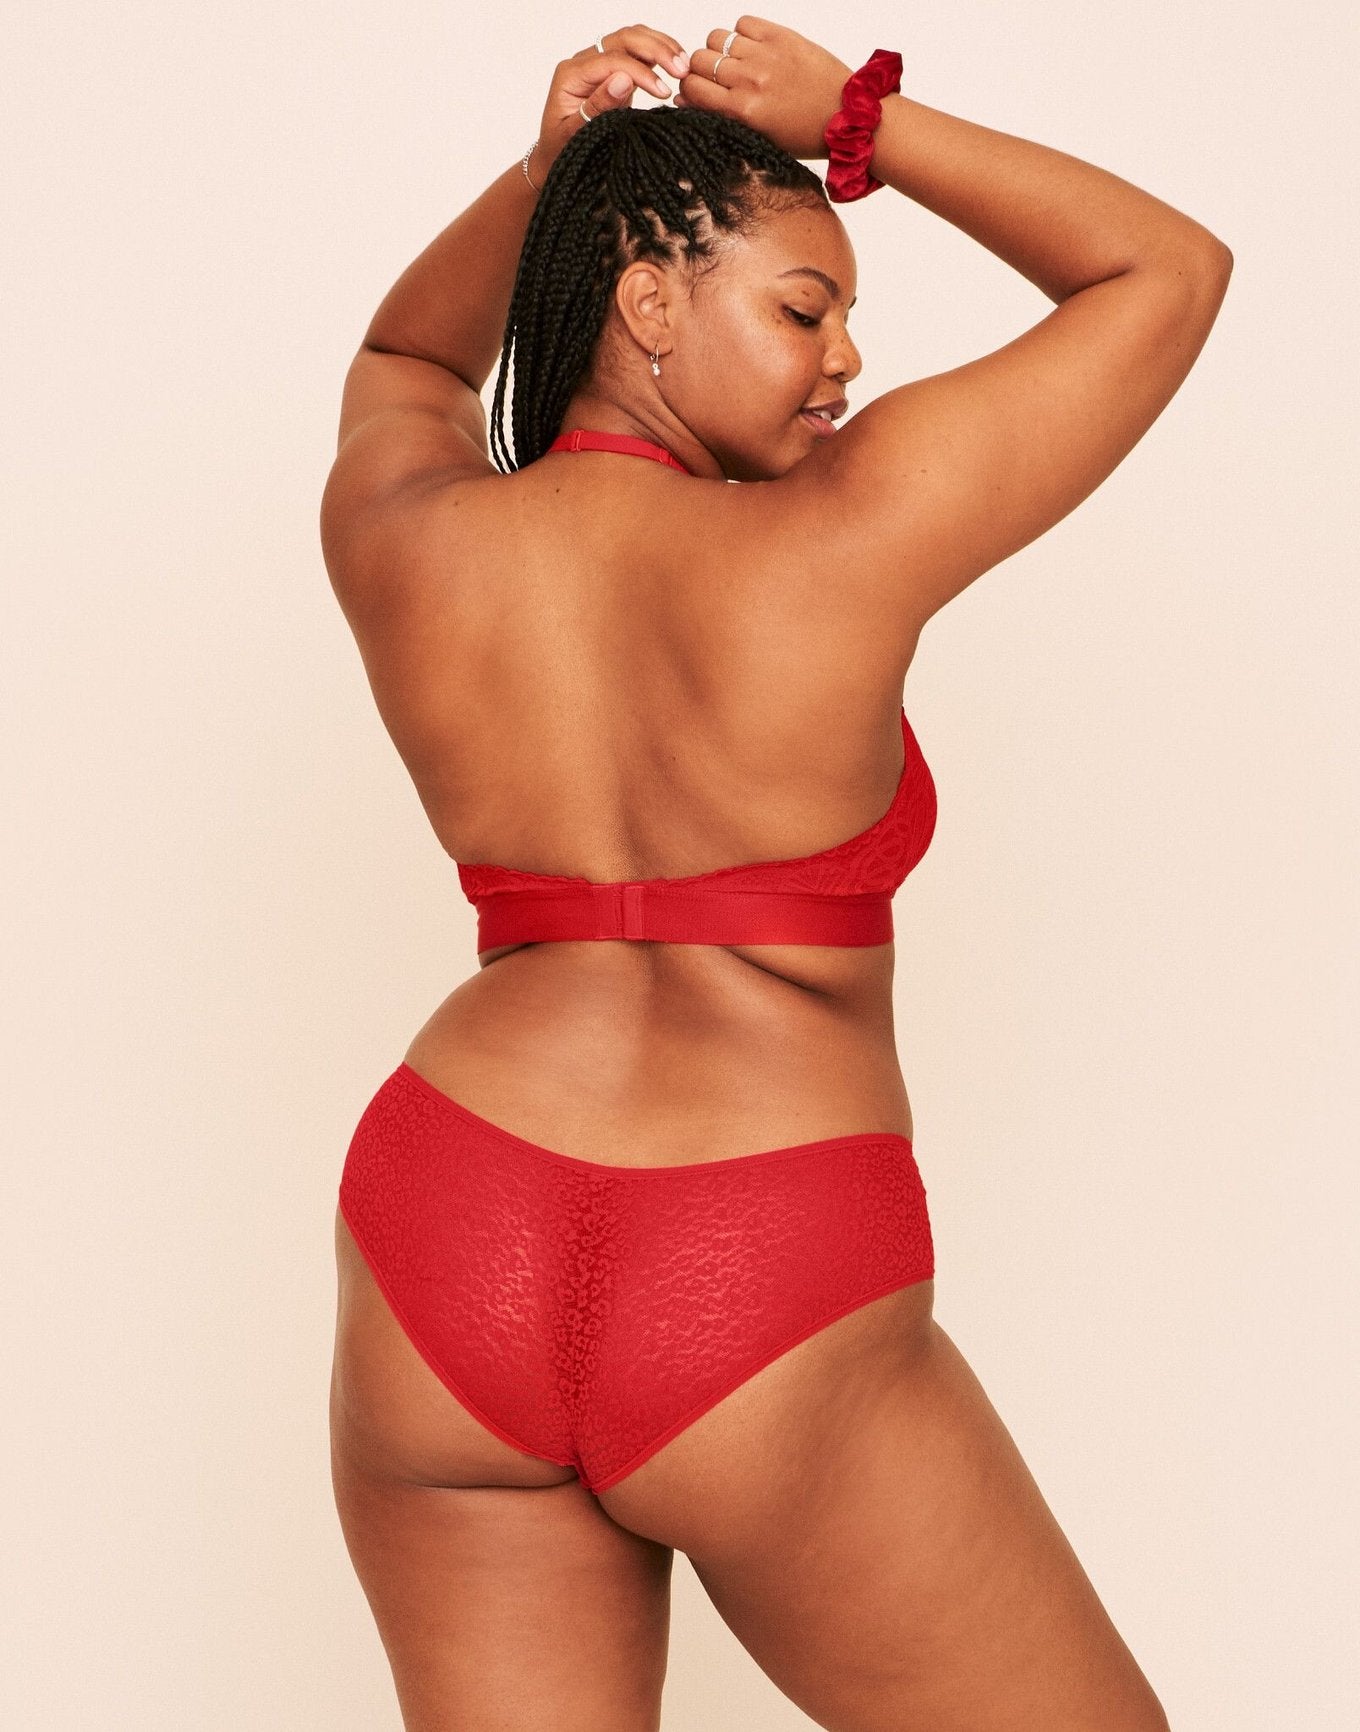 Earth Republic Billie Lace Lace Cheeky in color Flame Scarlet and shape cheeky